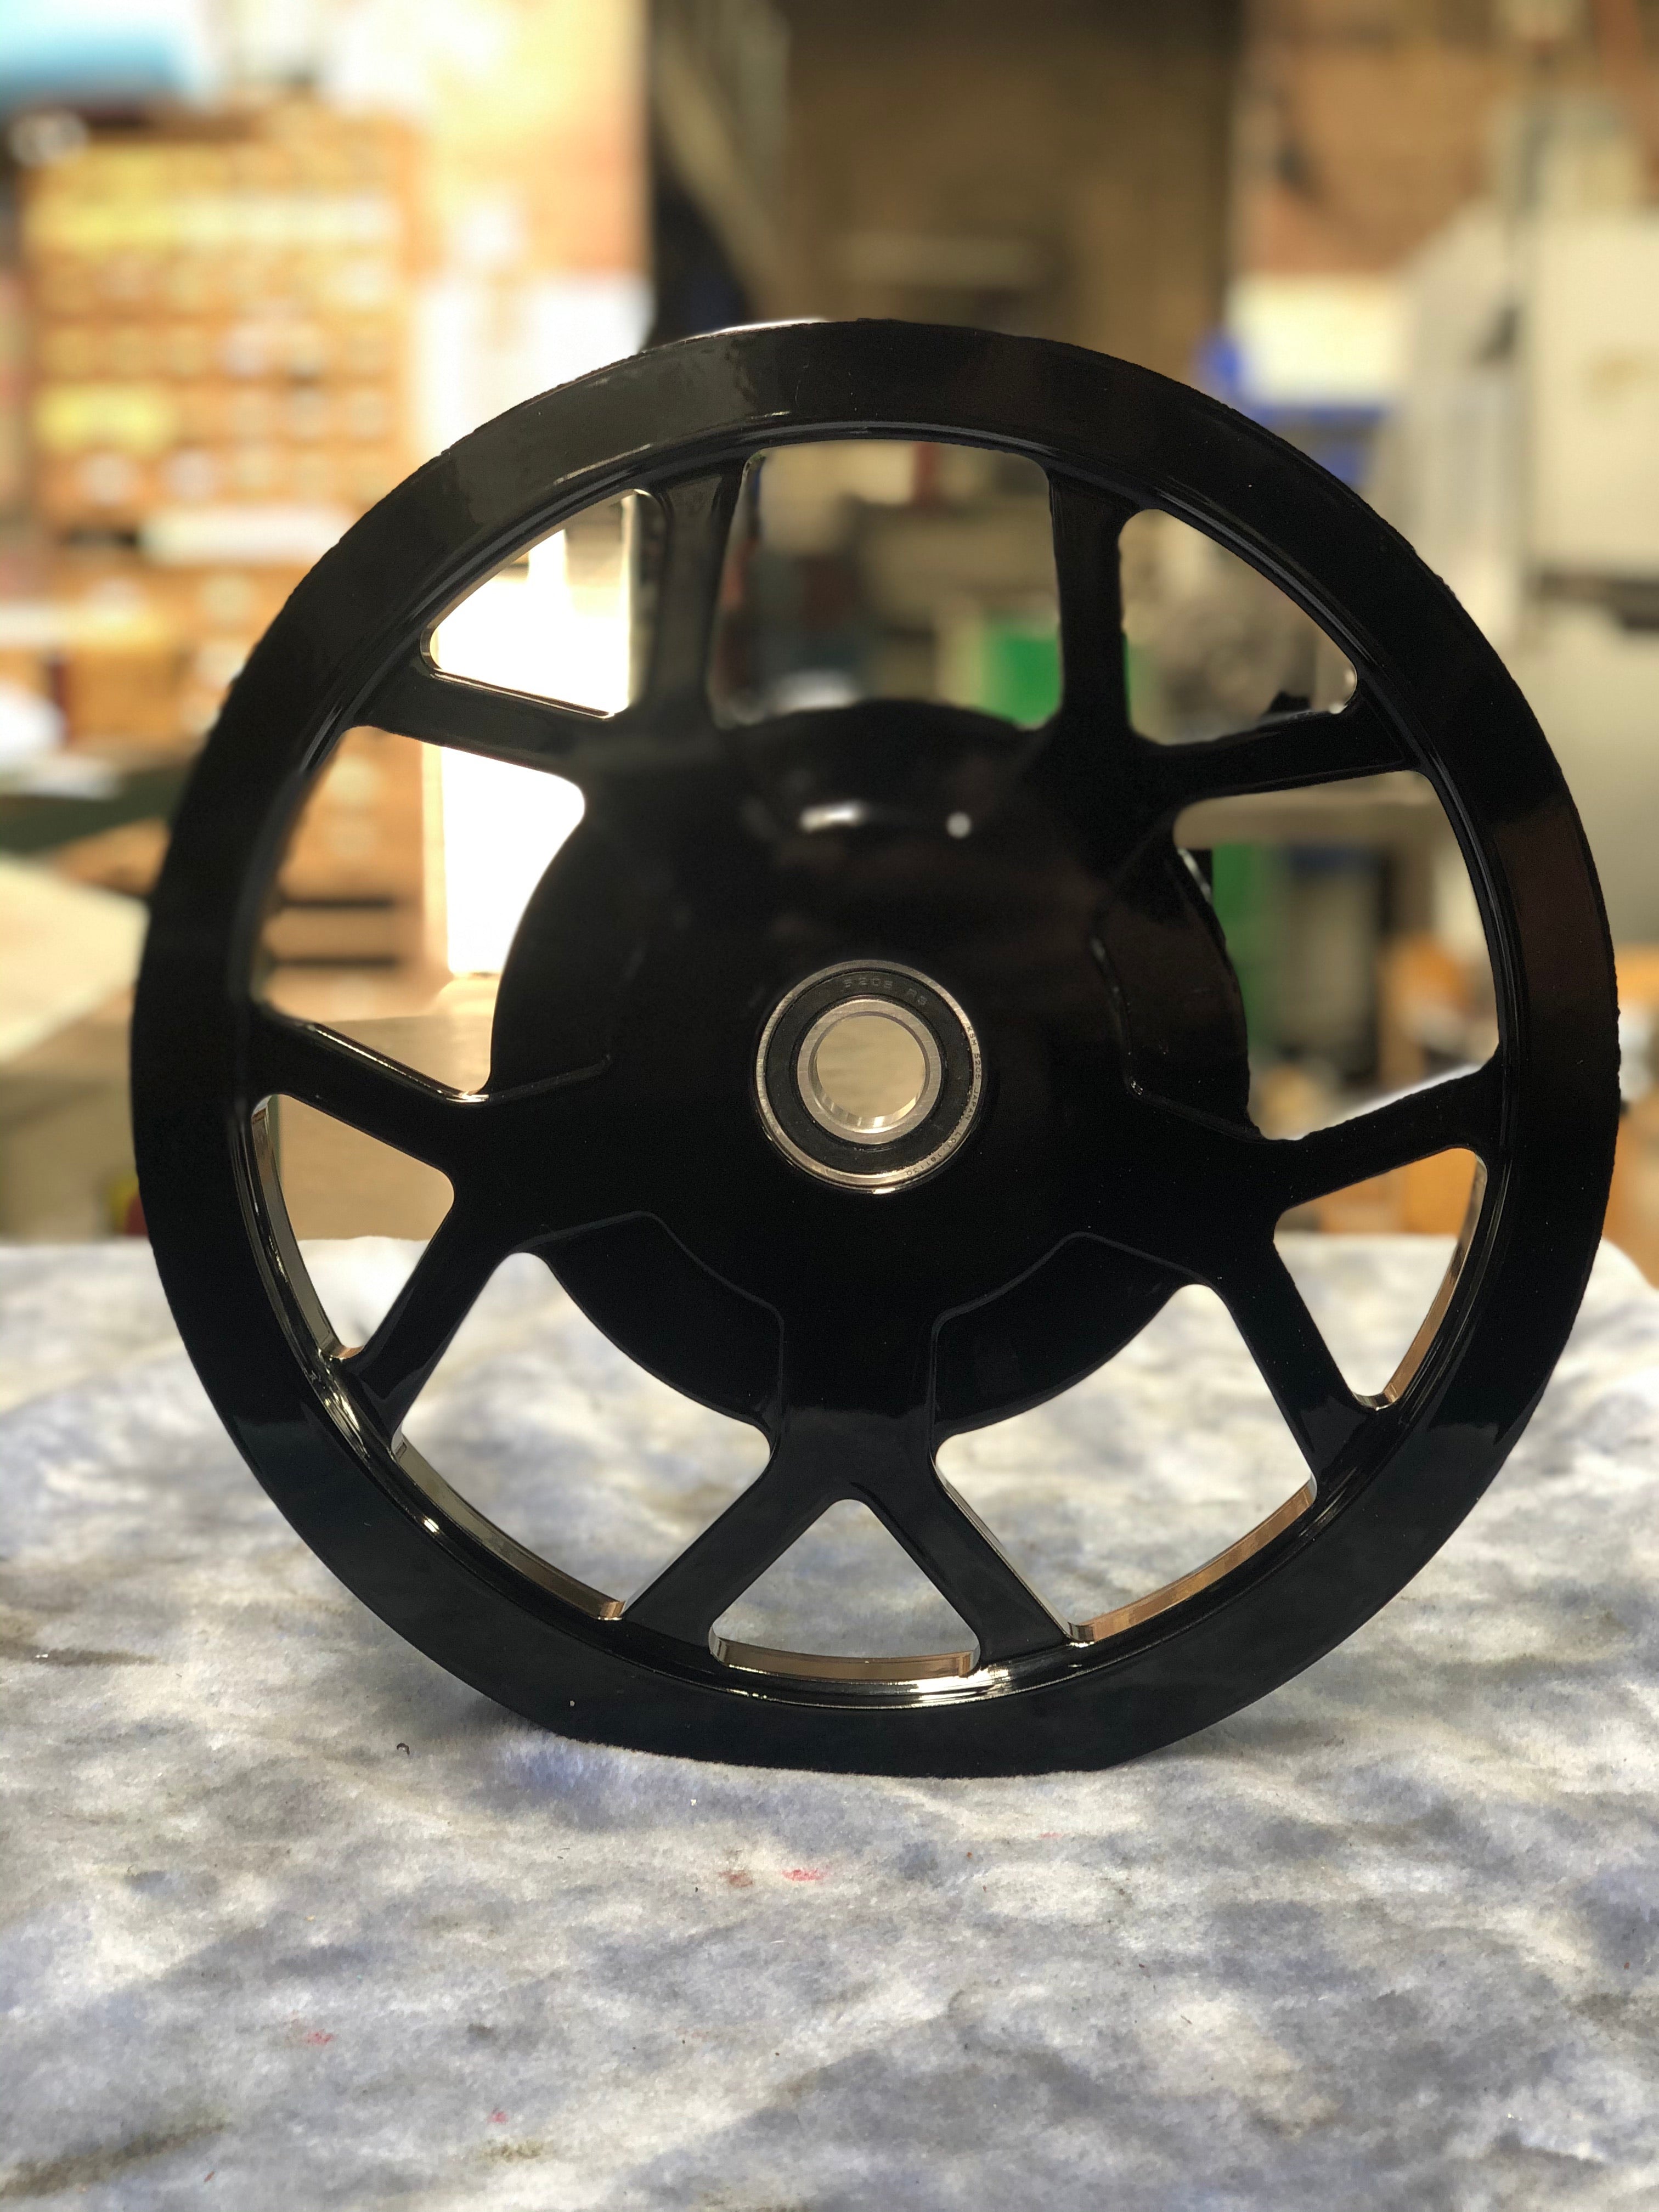 Vrod NRS matching rear pulley